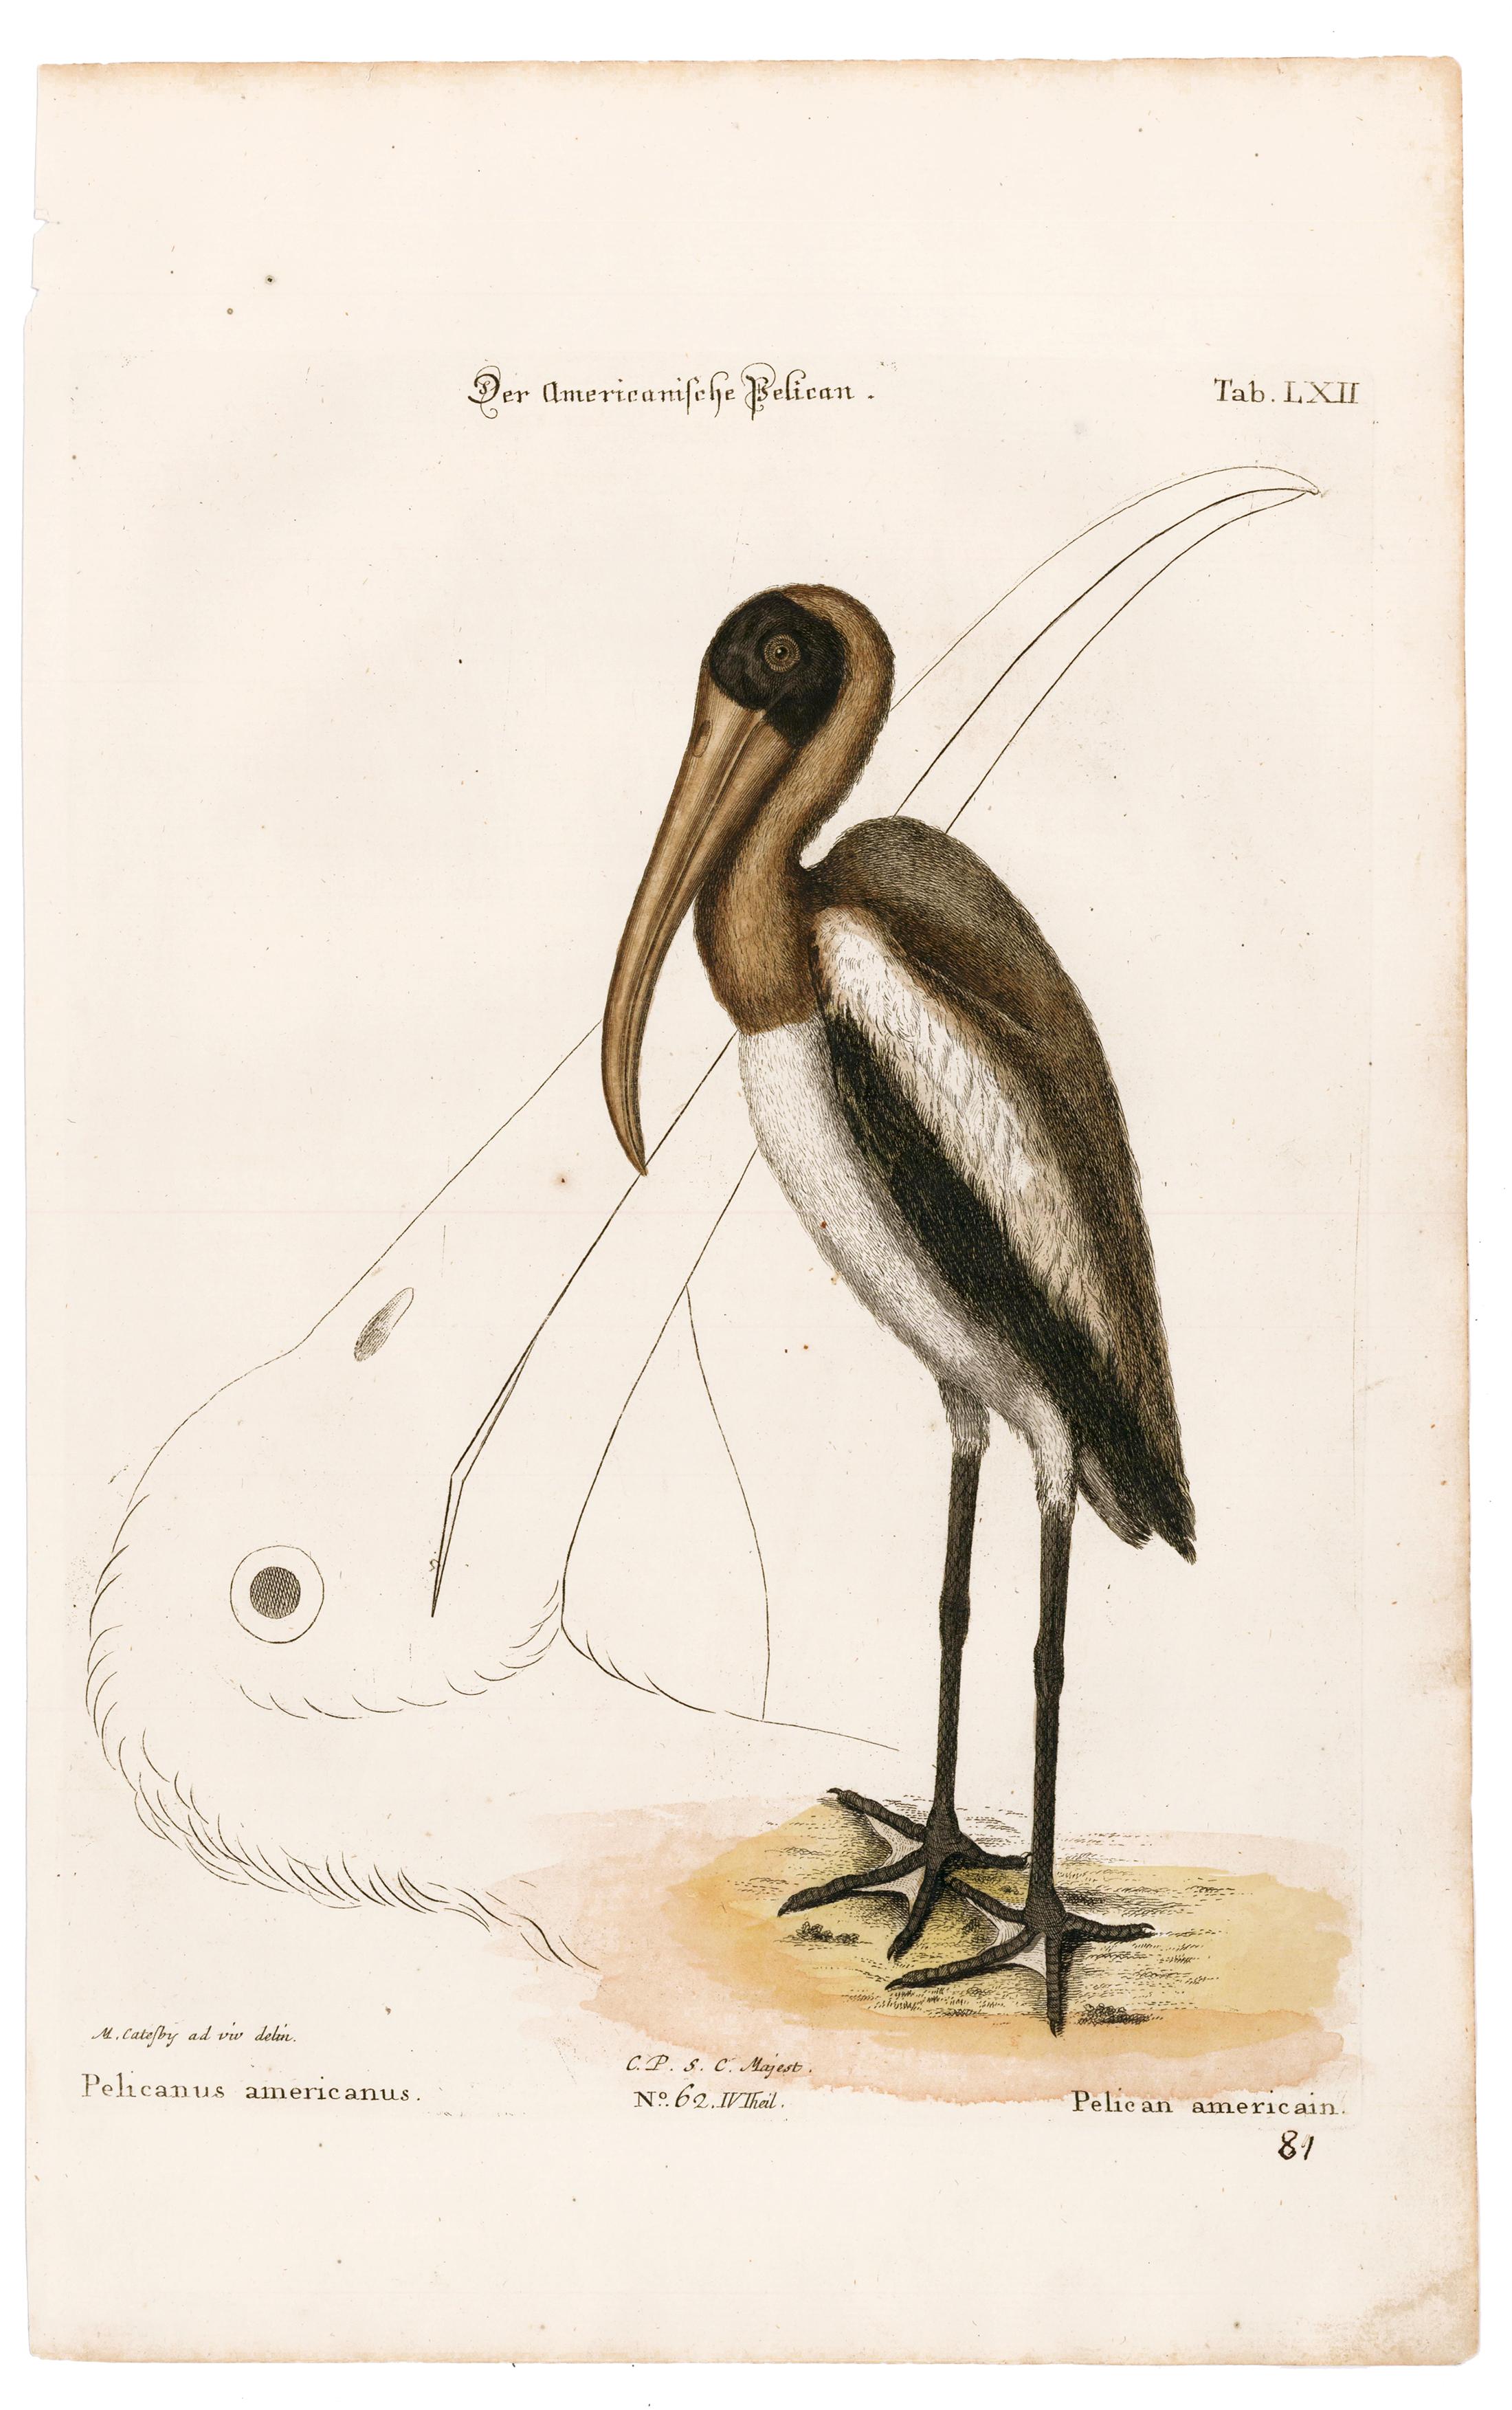 American Pelican Engraving - Print by Mark Catesby (after)